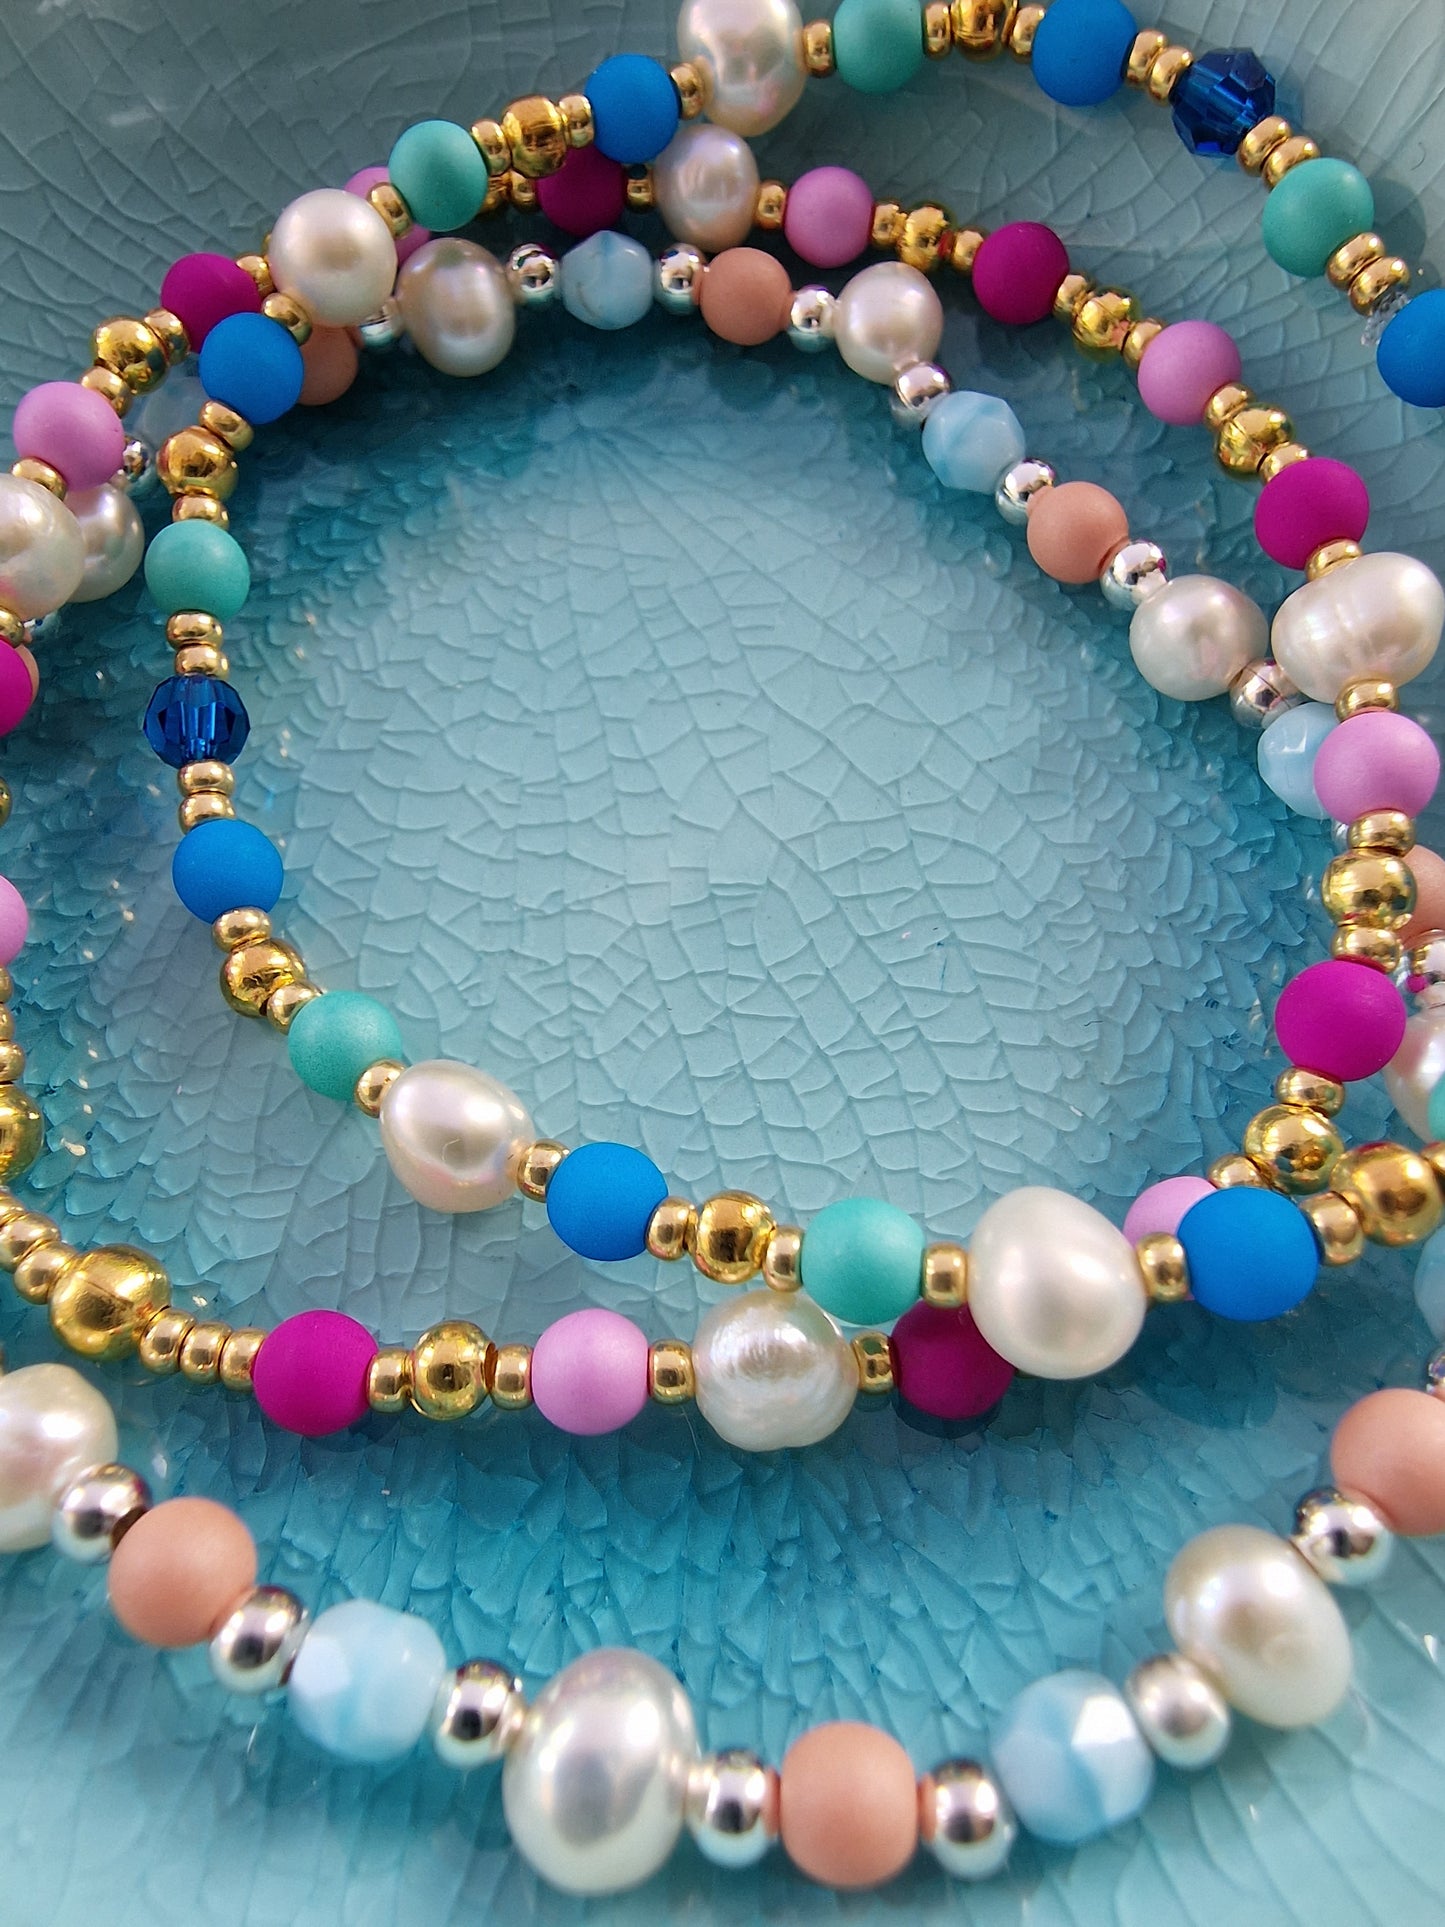 Czech glass bead and pearl bracelets in blues, pinks and pale shades